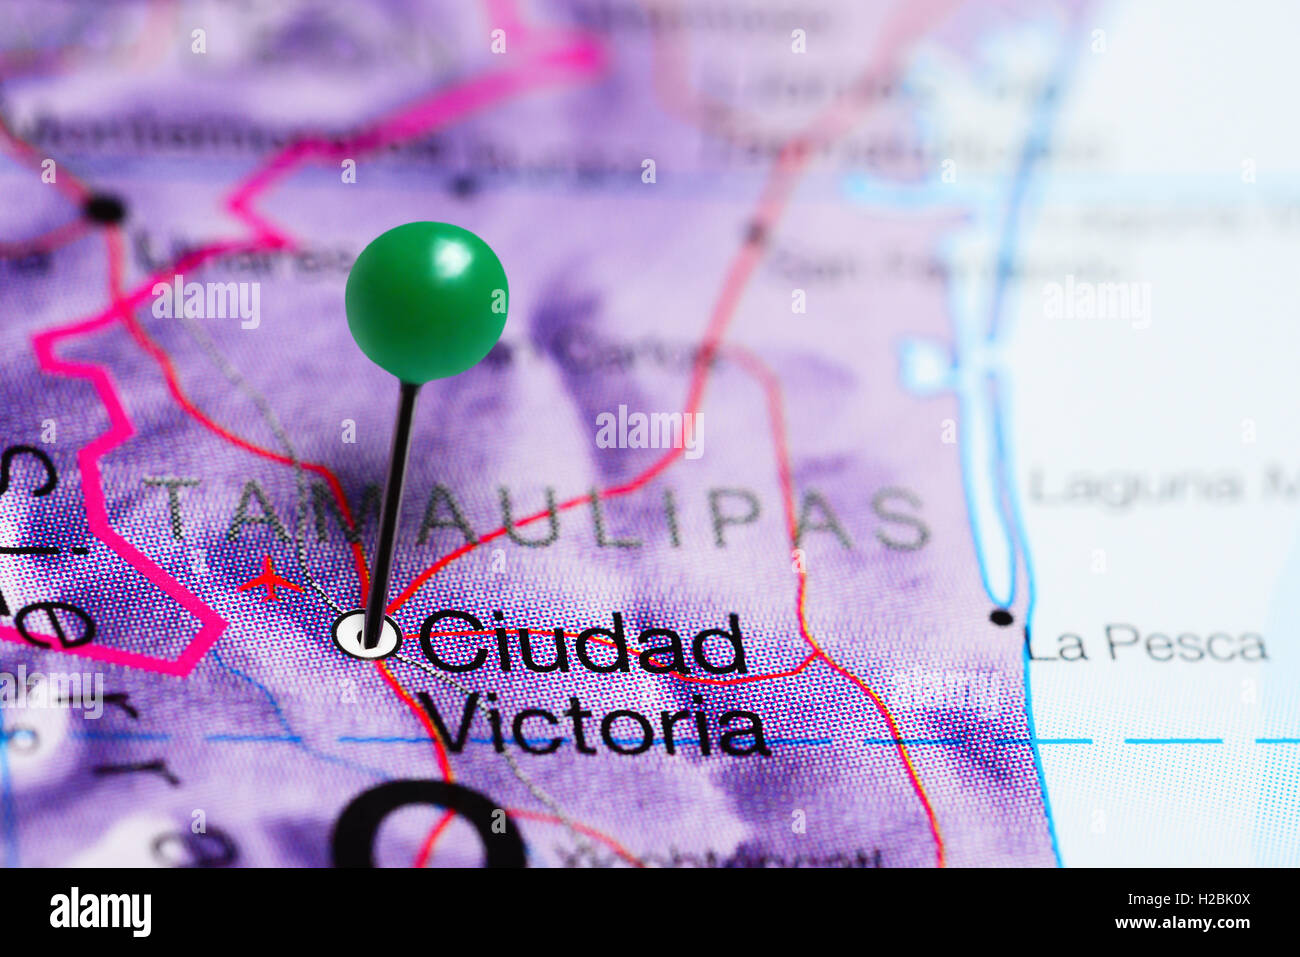 Ciudad Victoria pinned on a map of Mexico Stock Photo